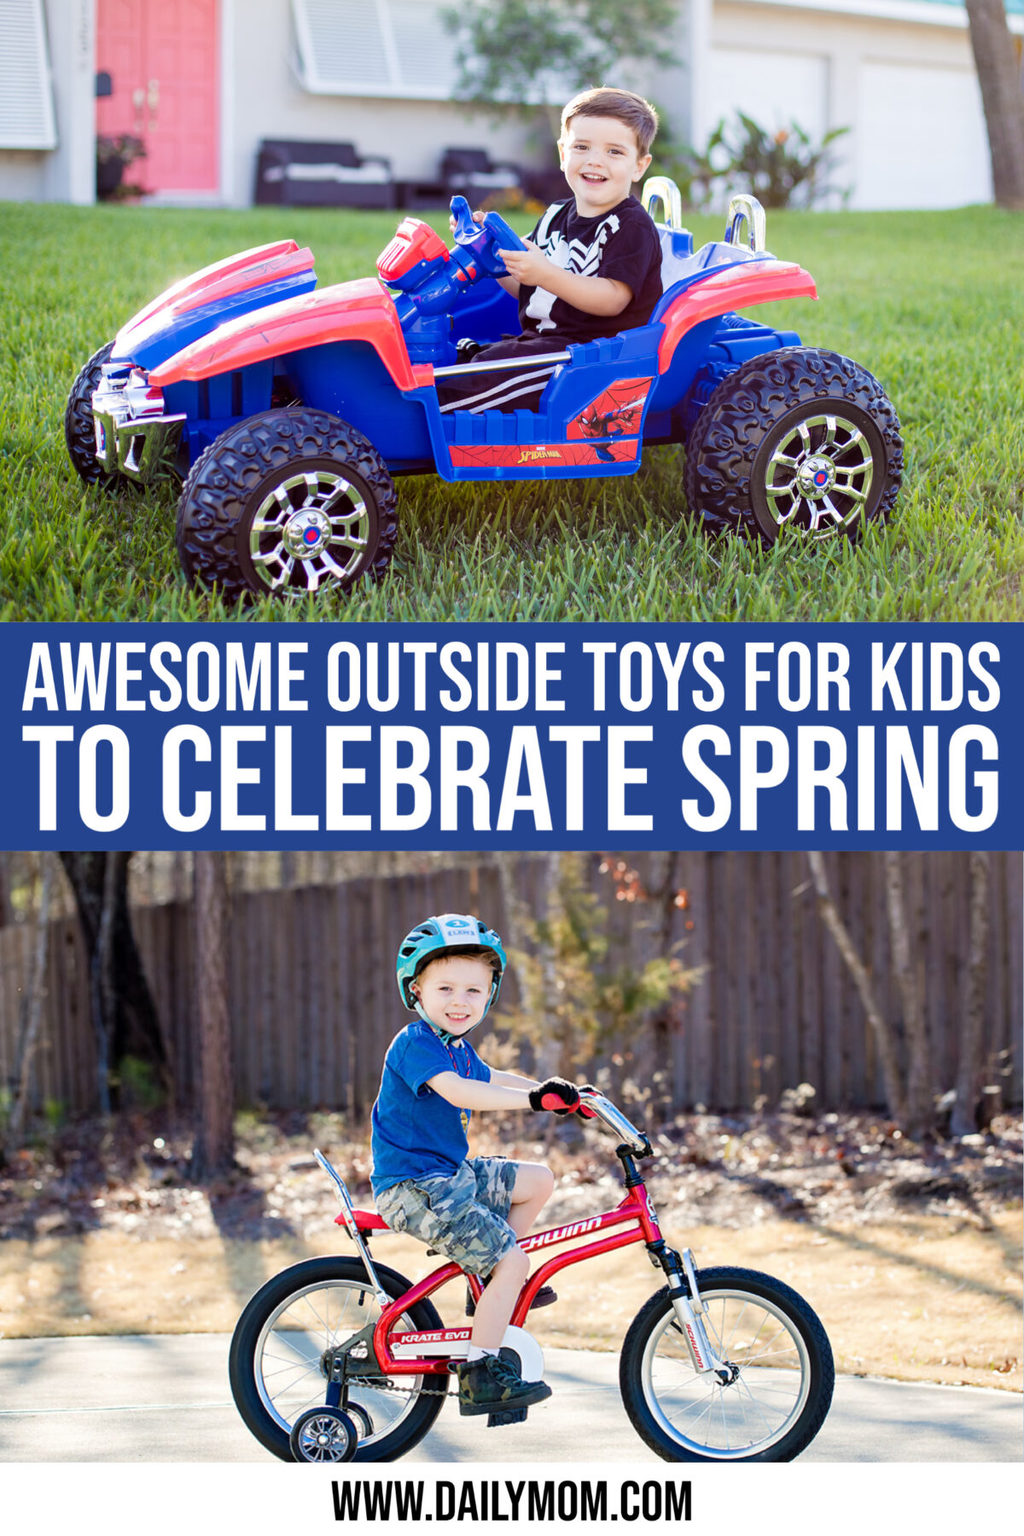 12 Awesome Inside & Outside Toys For Kids To Celebrate Spring